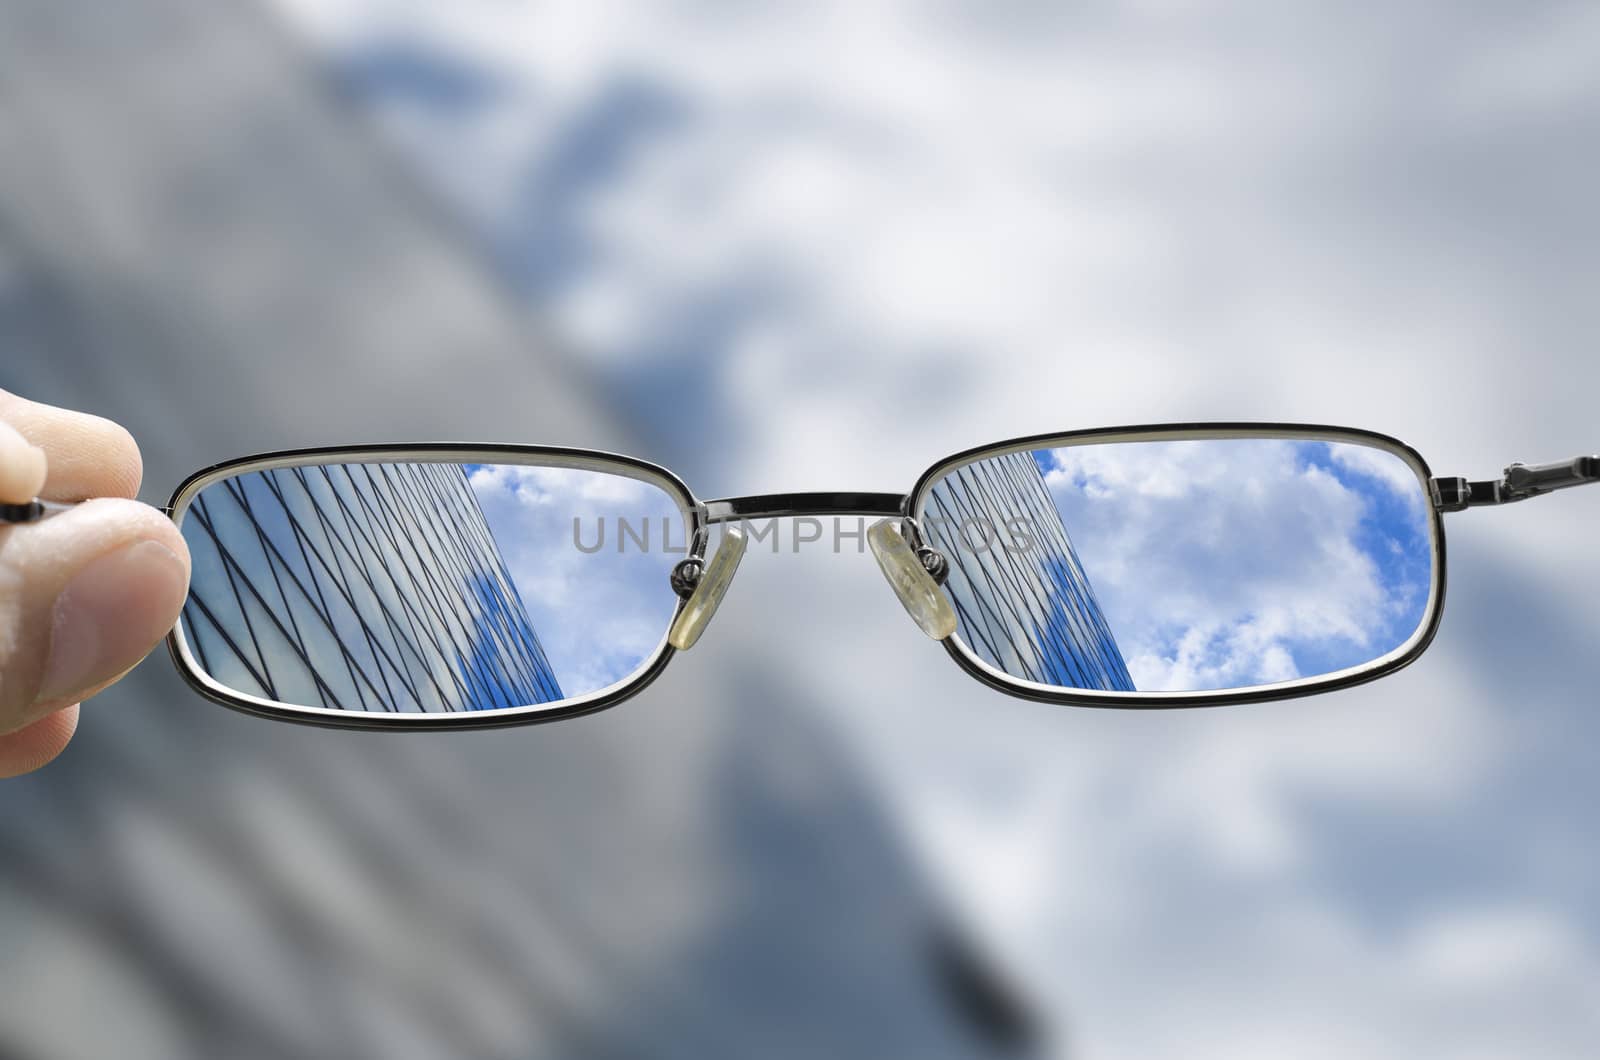 out of focus glass business building with sky and clouds above and hand holding glasses that correct the vision